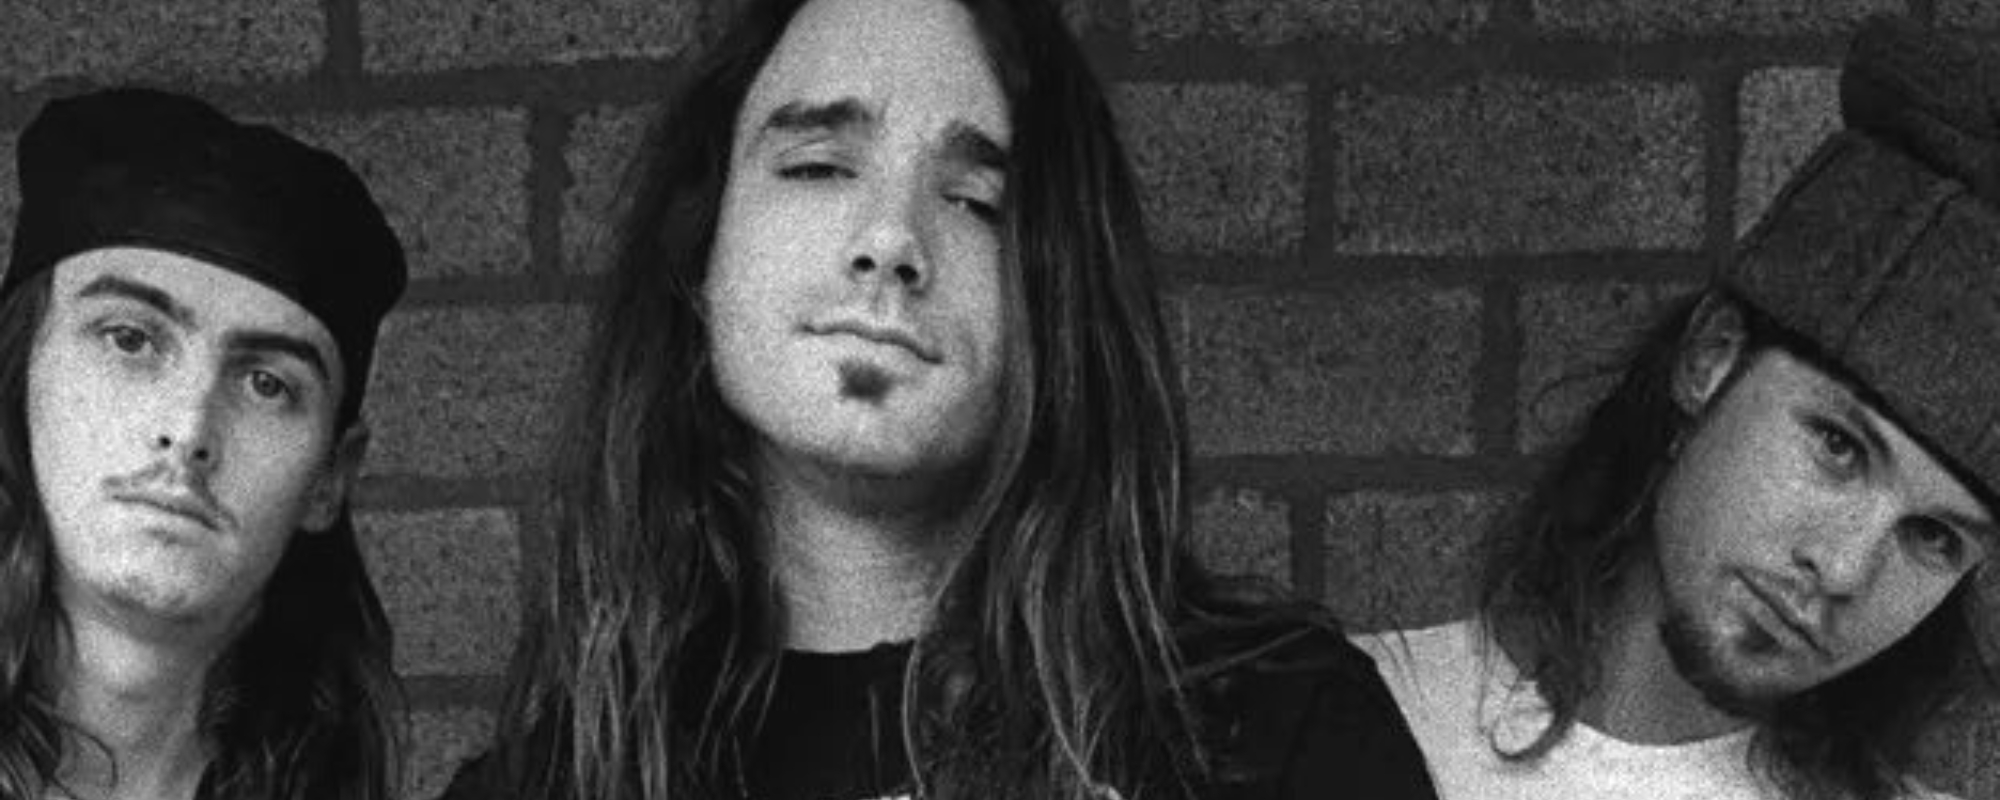 Ex-Pearl Jam Drummer Dave Abbruzzese Reveals How He Almost Joined Guns N’ Roses